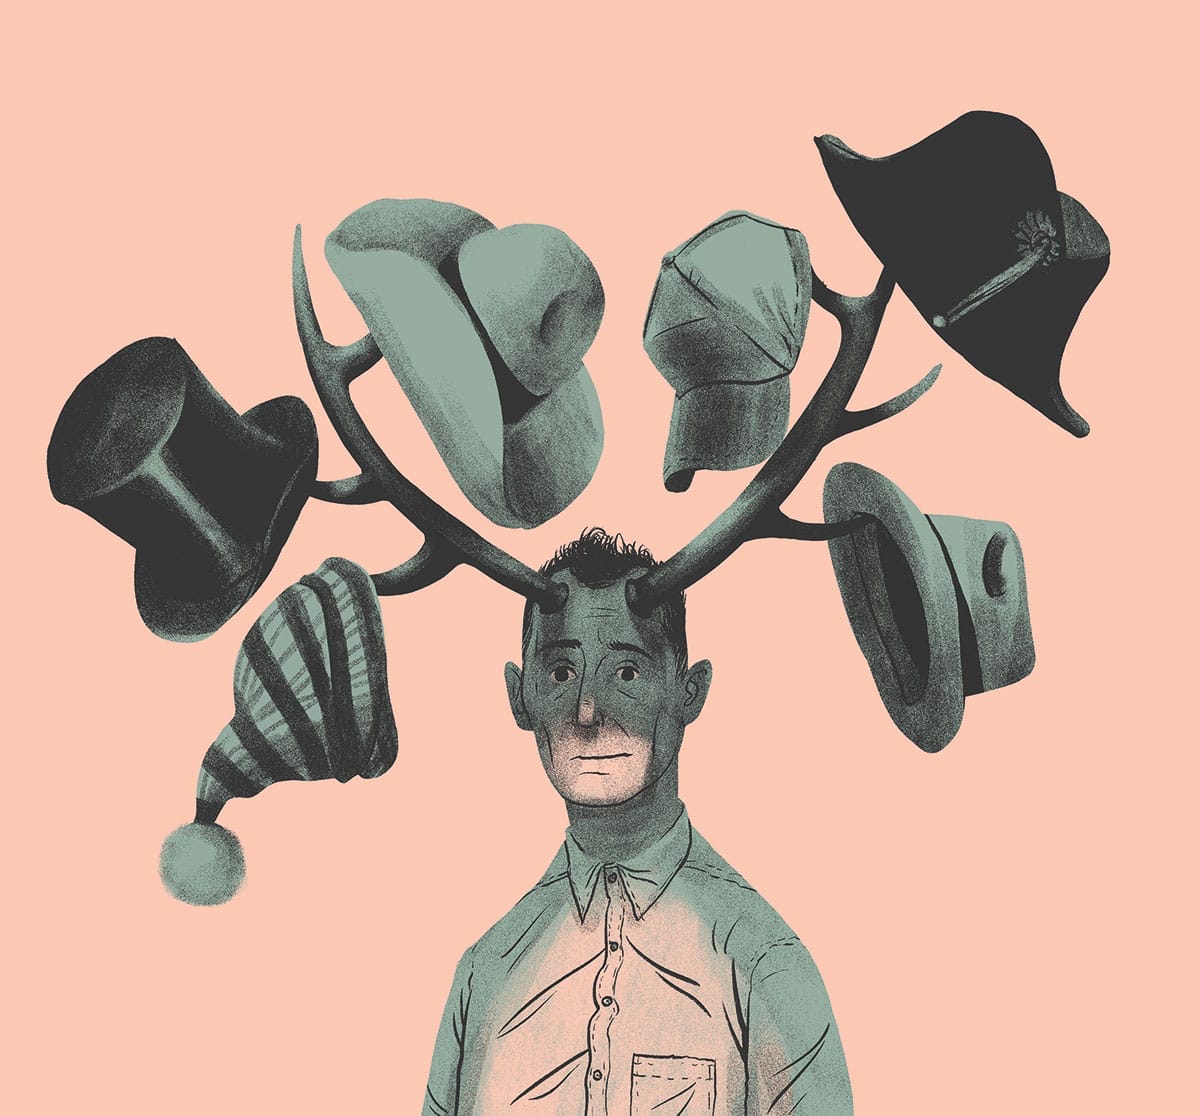 Conceptual illustration of a person with antlers on their head and hats hanging from the antlers.